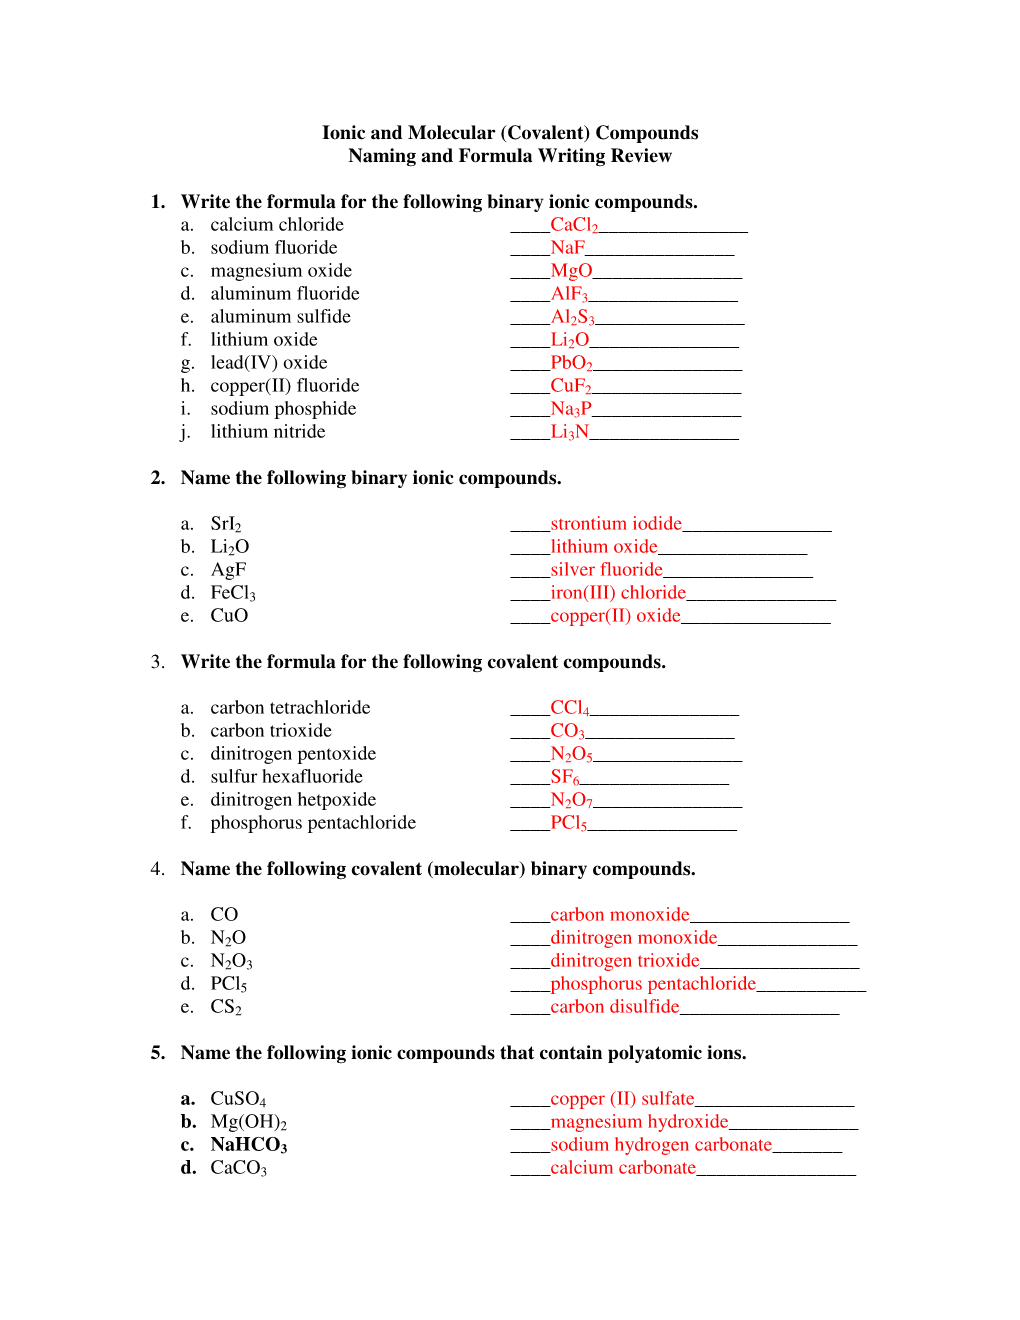 Ionic and Molecular (Covalent) Compounds Naming and Formula Writing Review